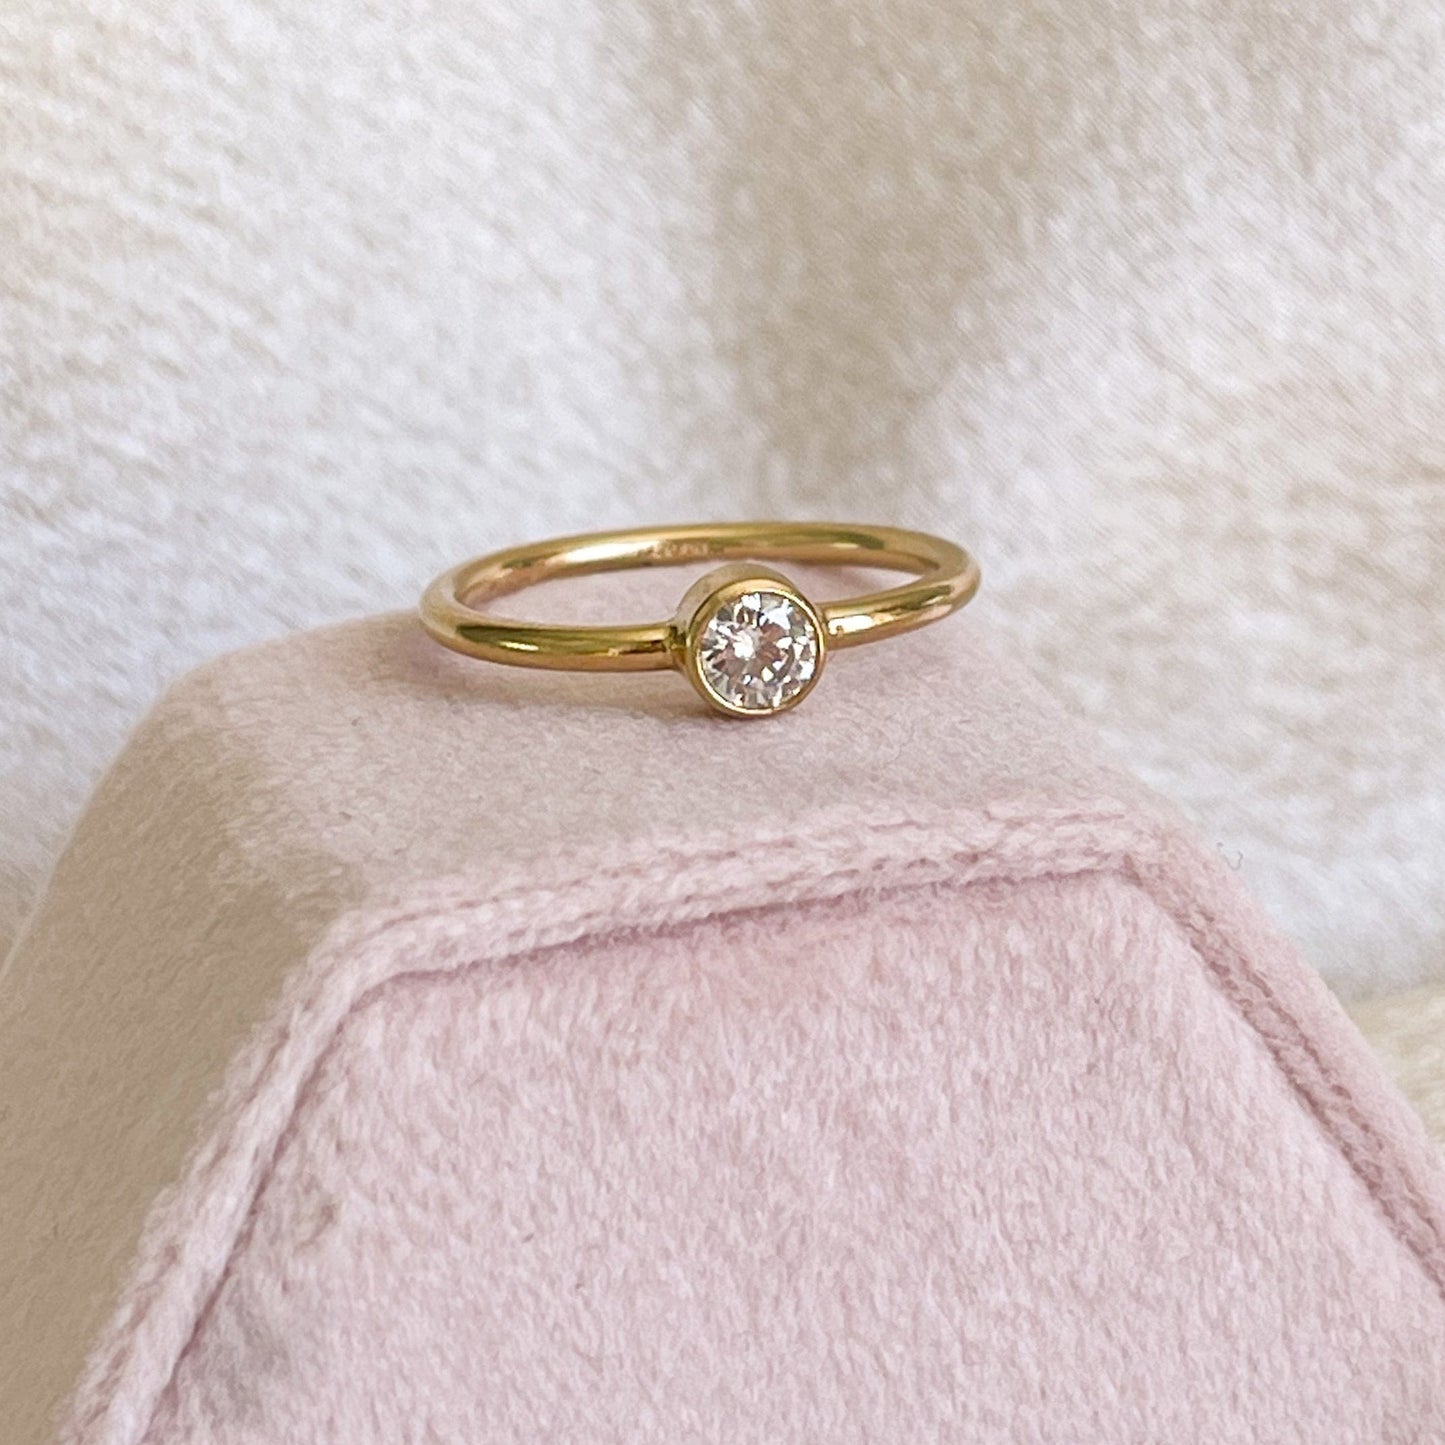 Cz Solitaire Ring